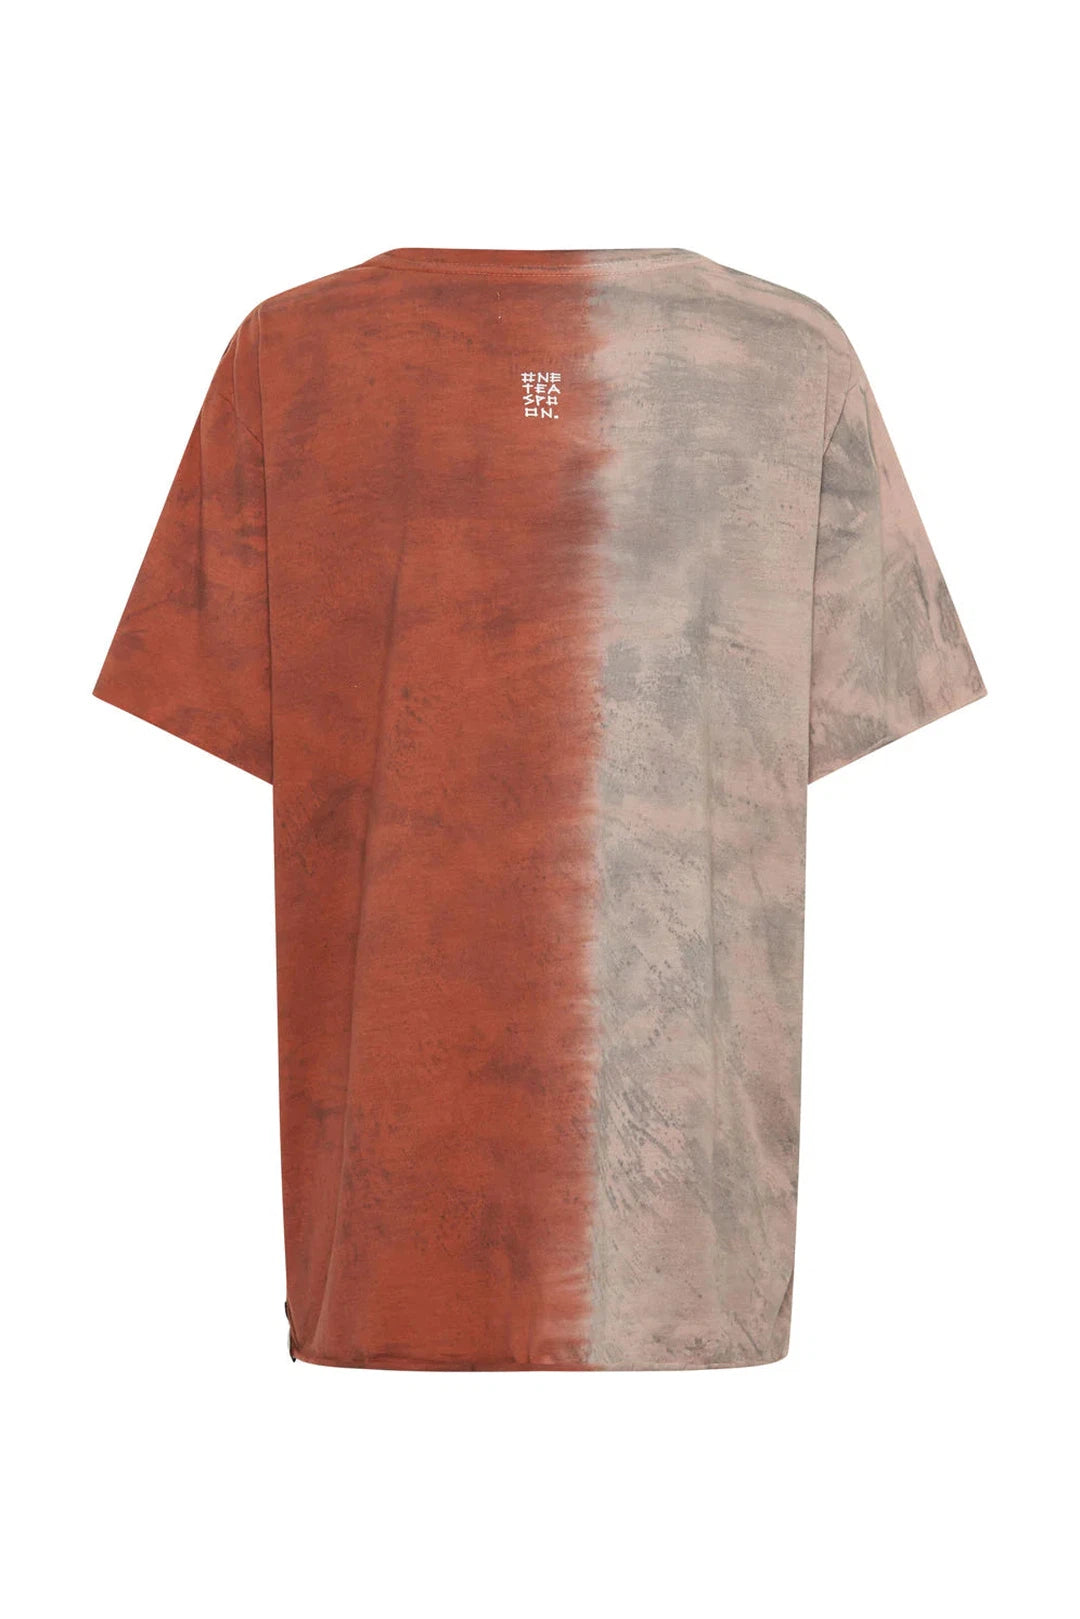 Good vibes only oversized hand dyed tee